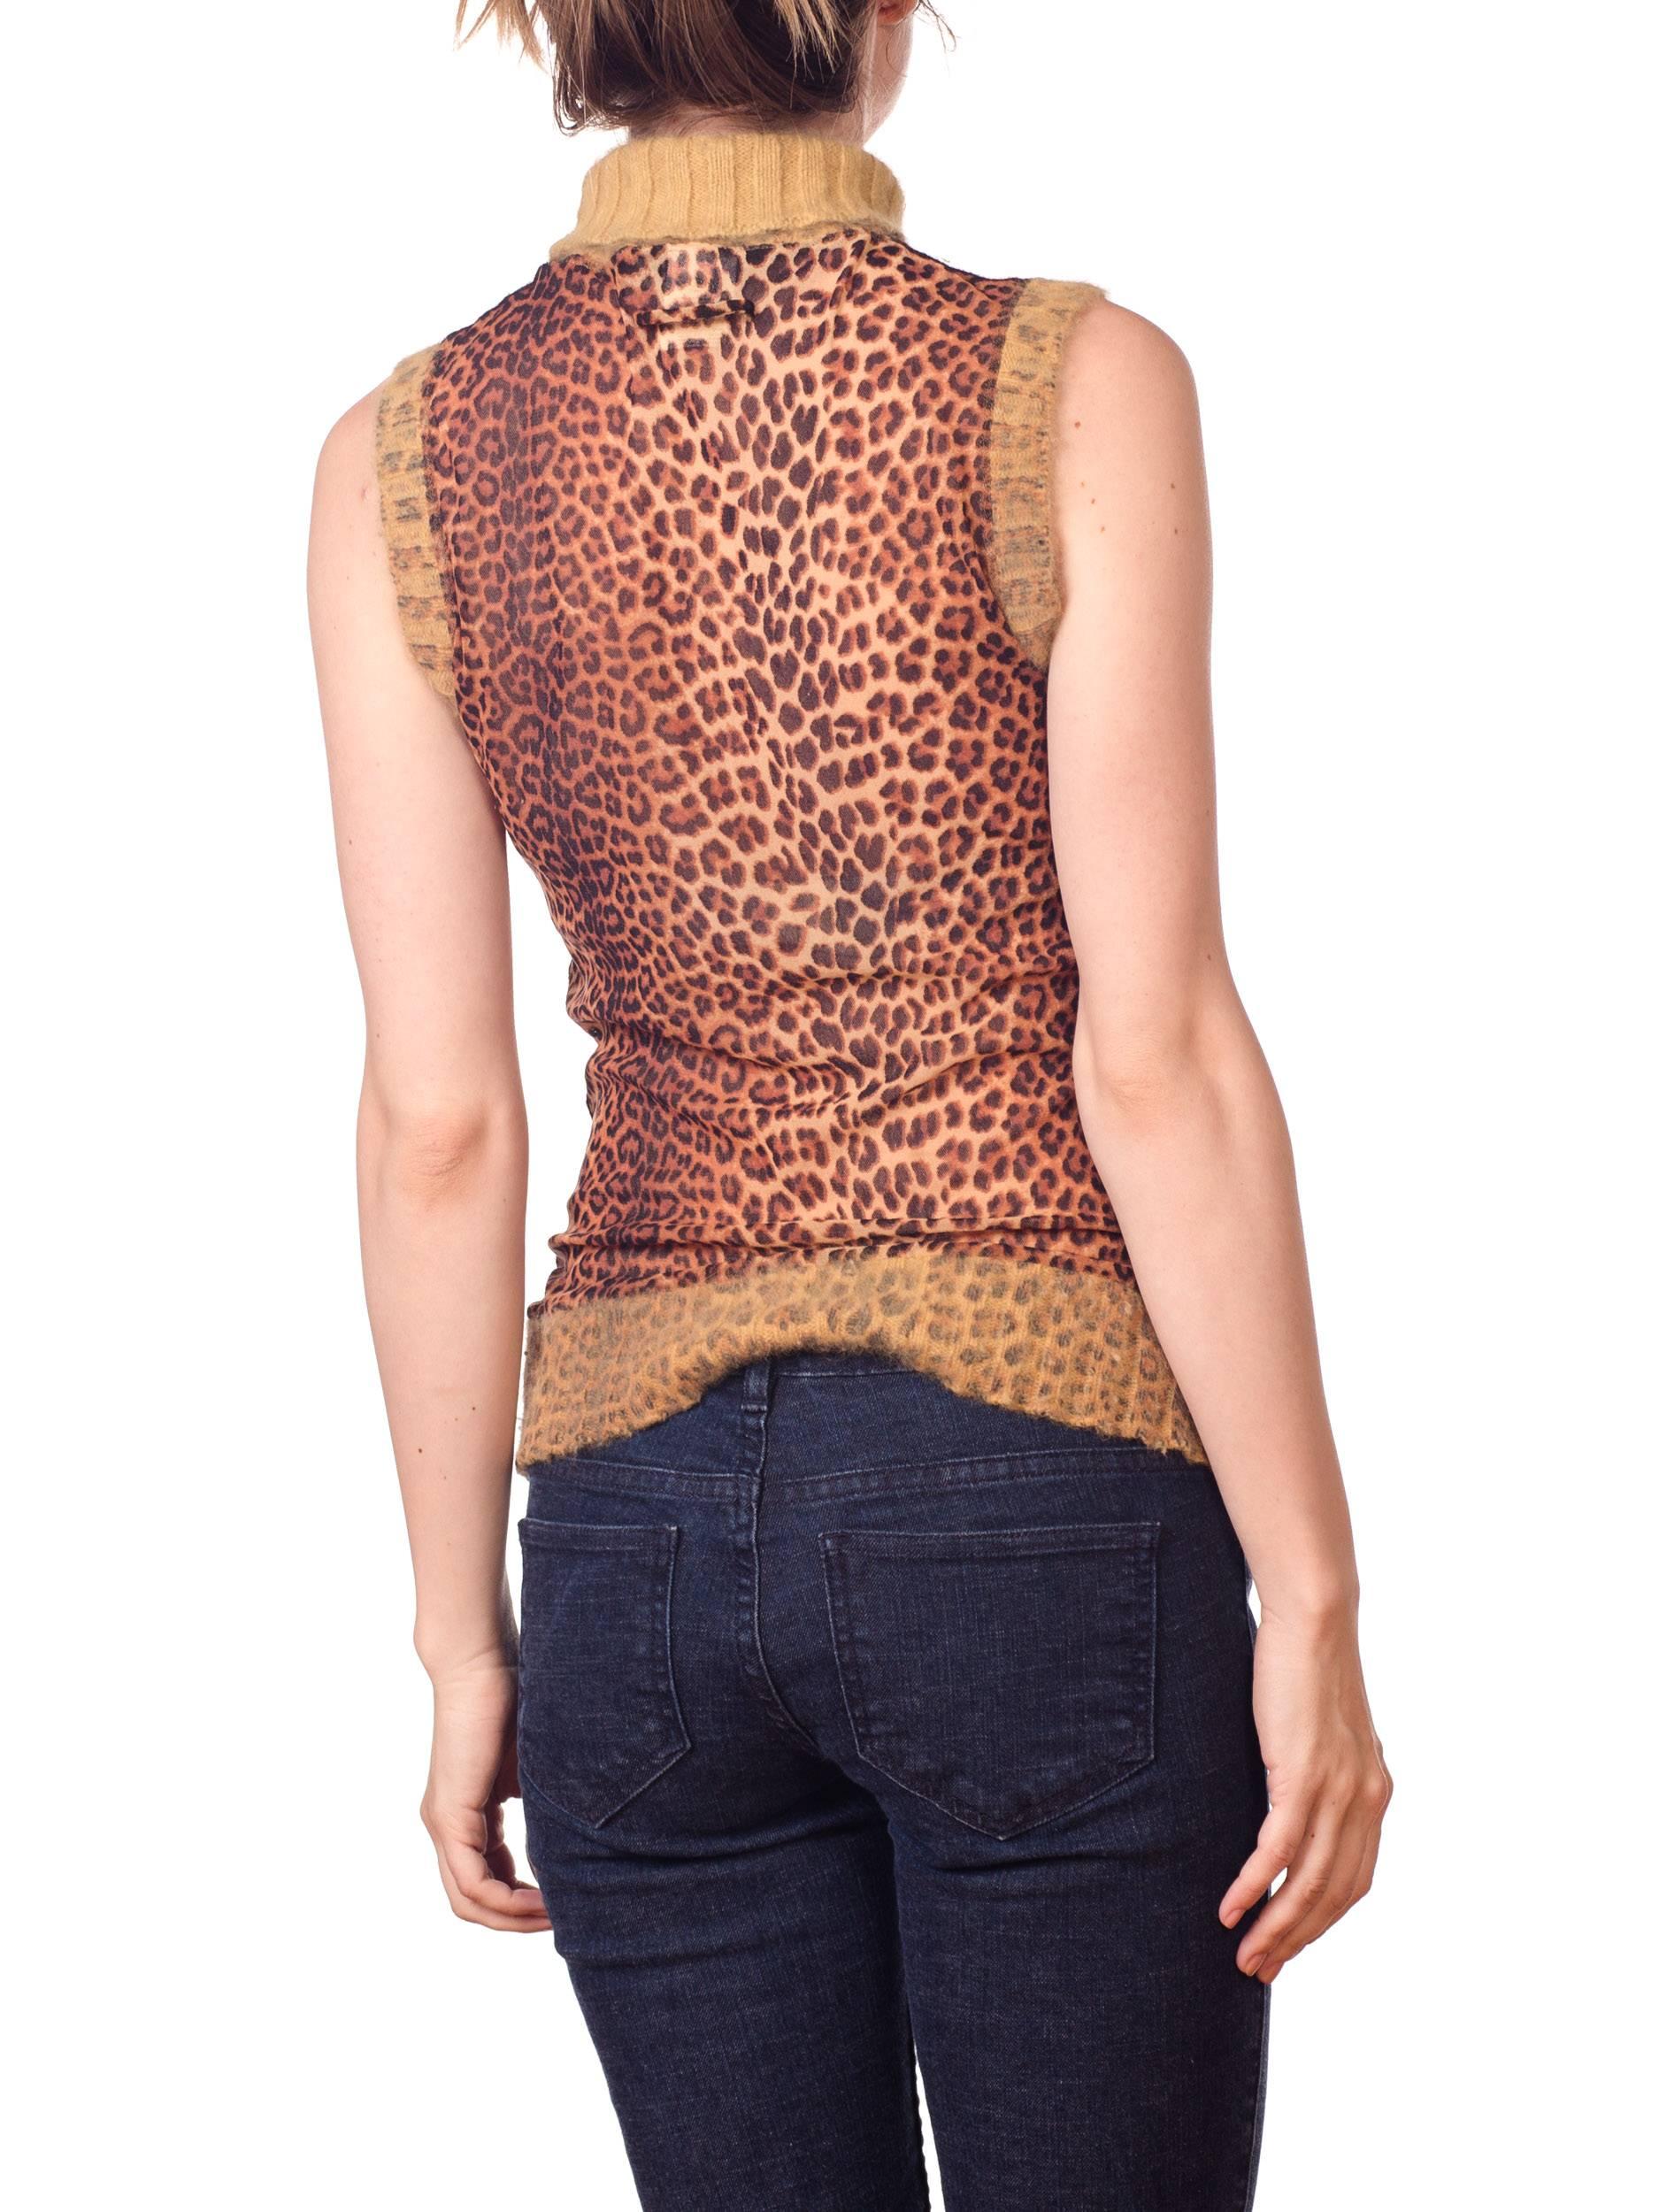 2000S JEAN PAUL GAULTIER Leopard Mesh Top And Cardigan Ensemble With Angora Trim 6